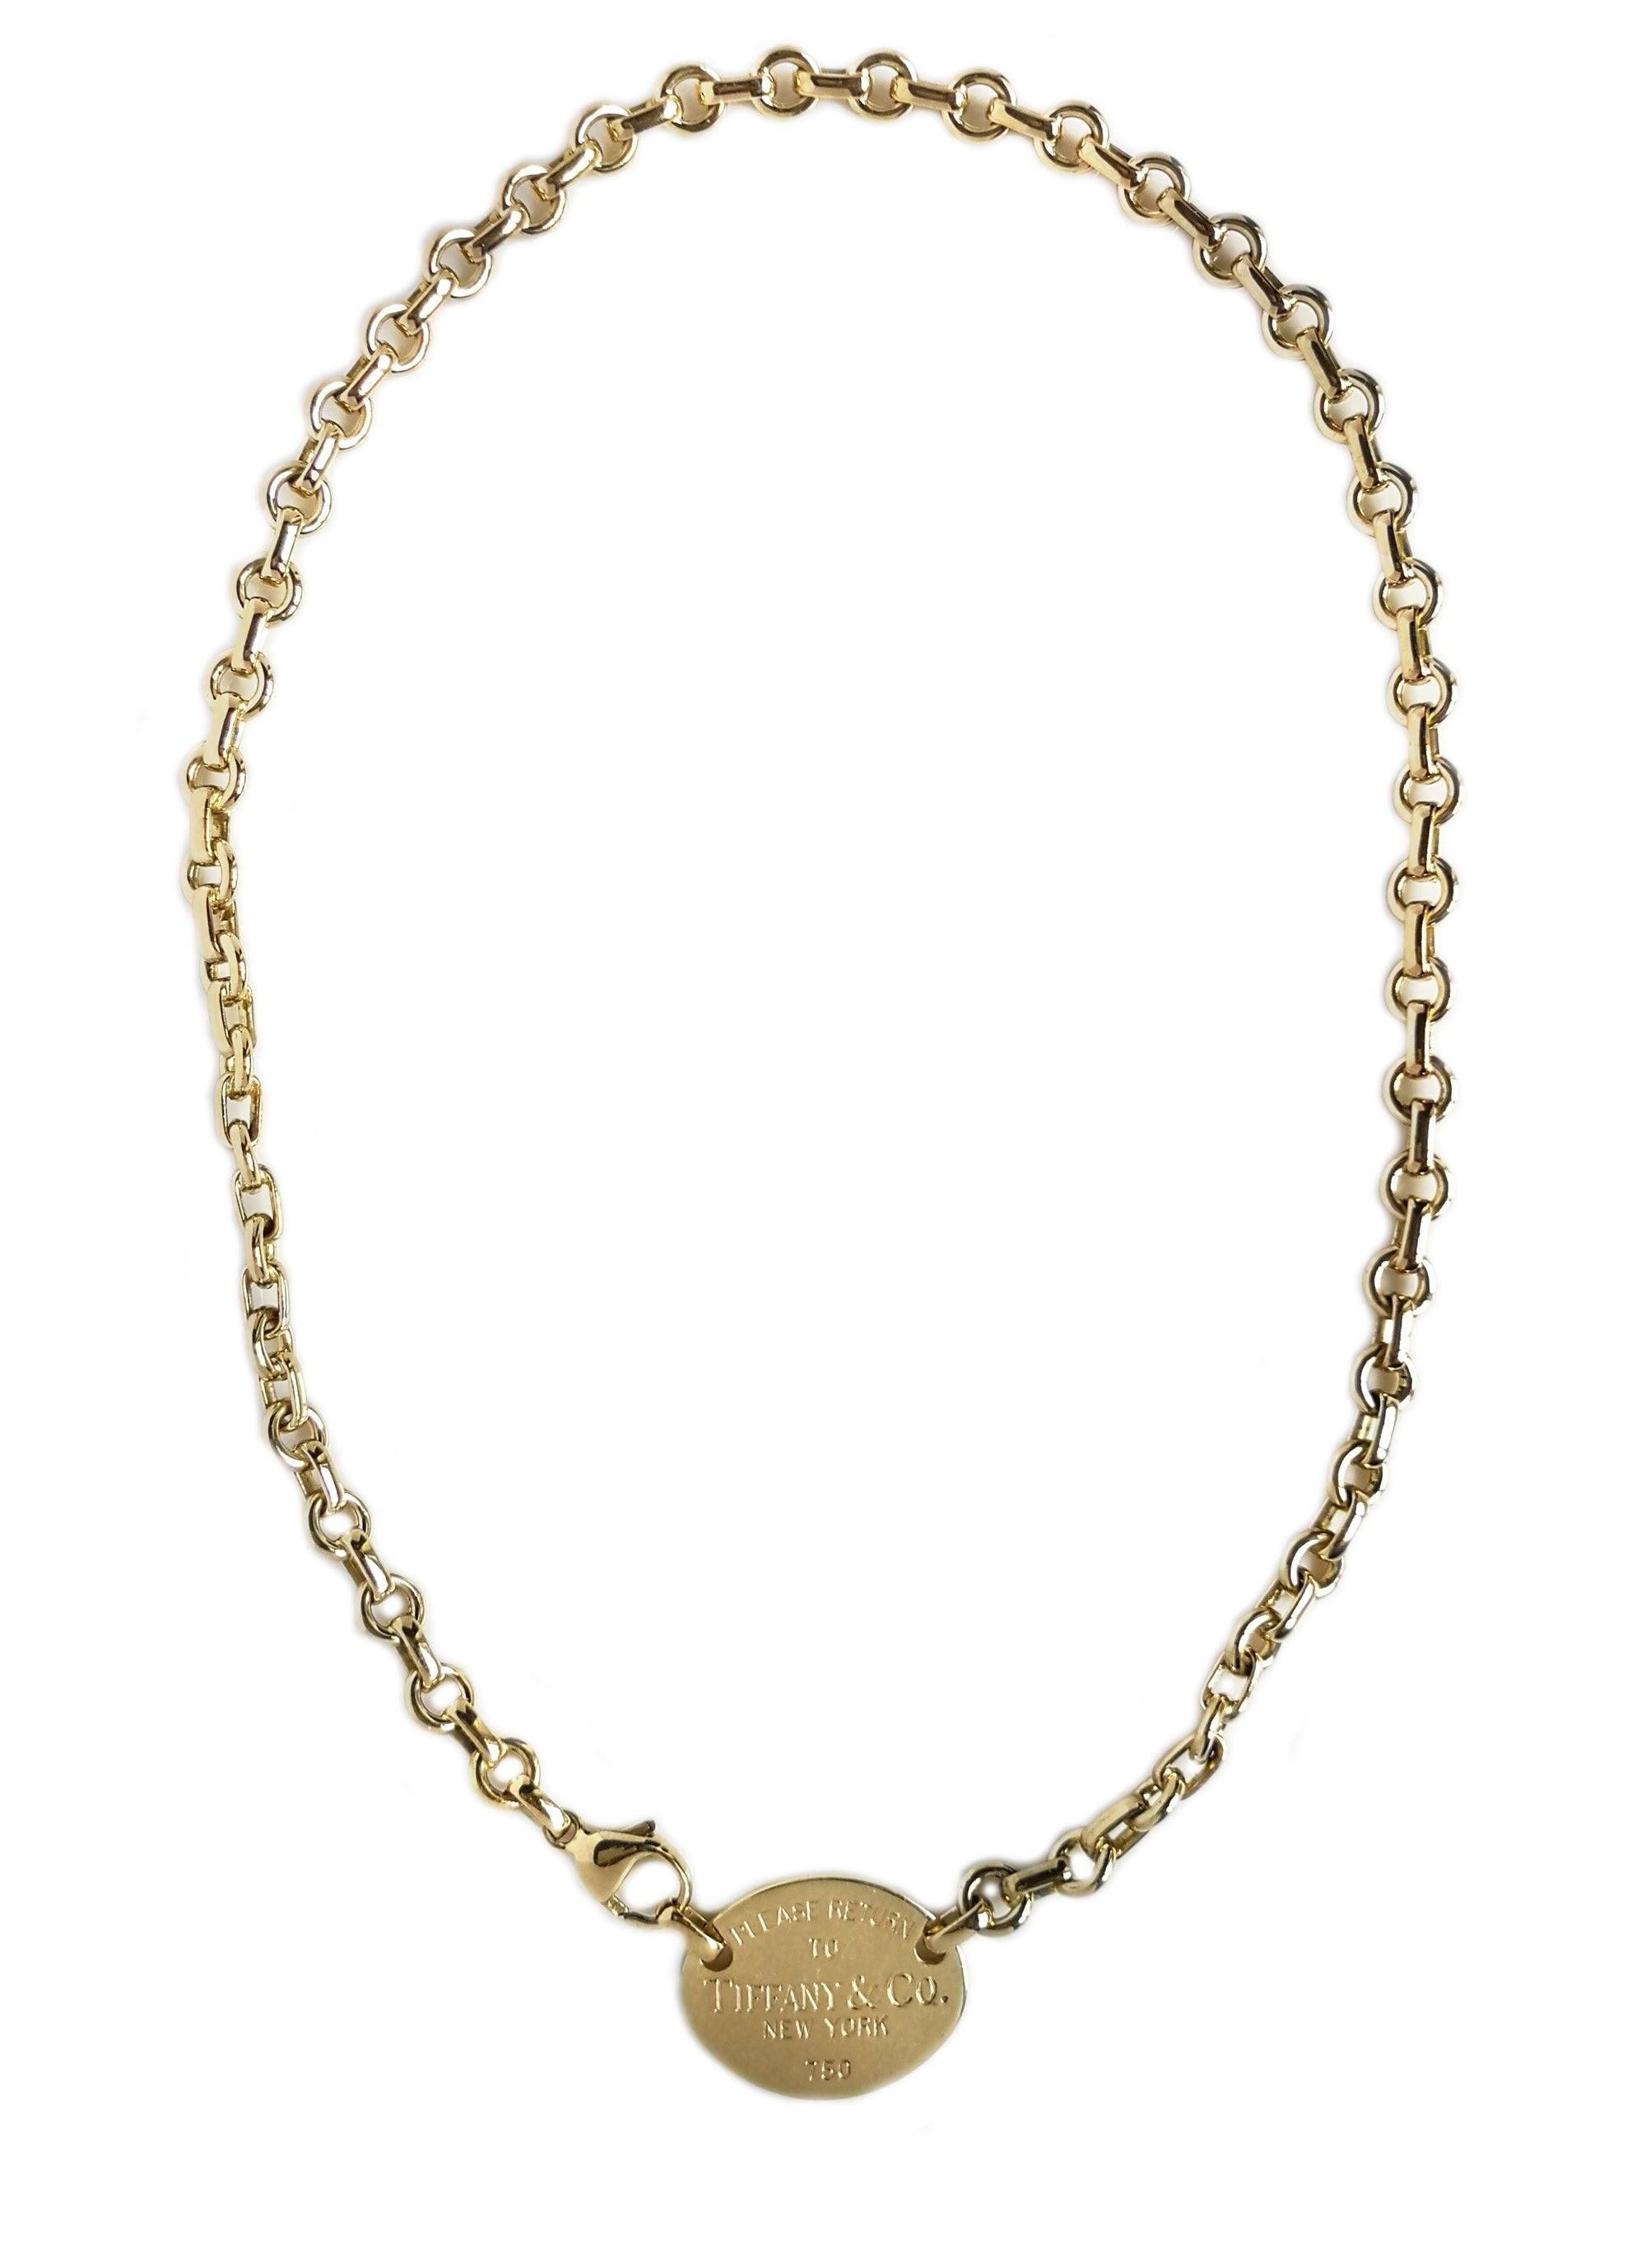 Tiffany & Co. Tiffany HardWear Small Link Necklace in Yellow Gold Necklaces  | Heathrow Reserve & Collect